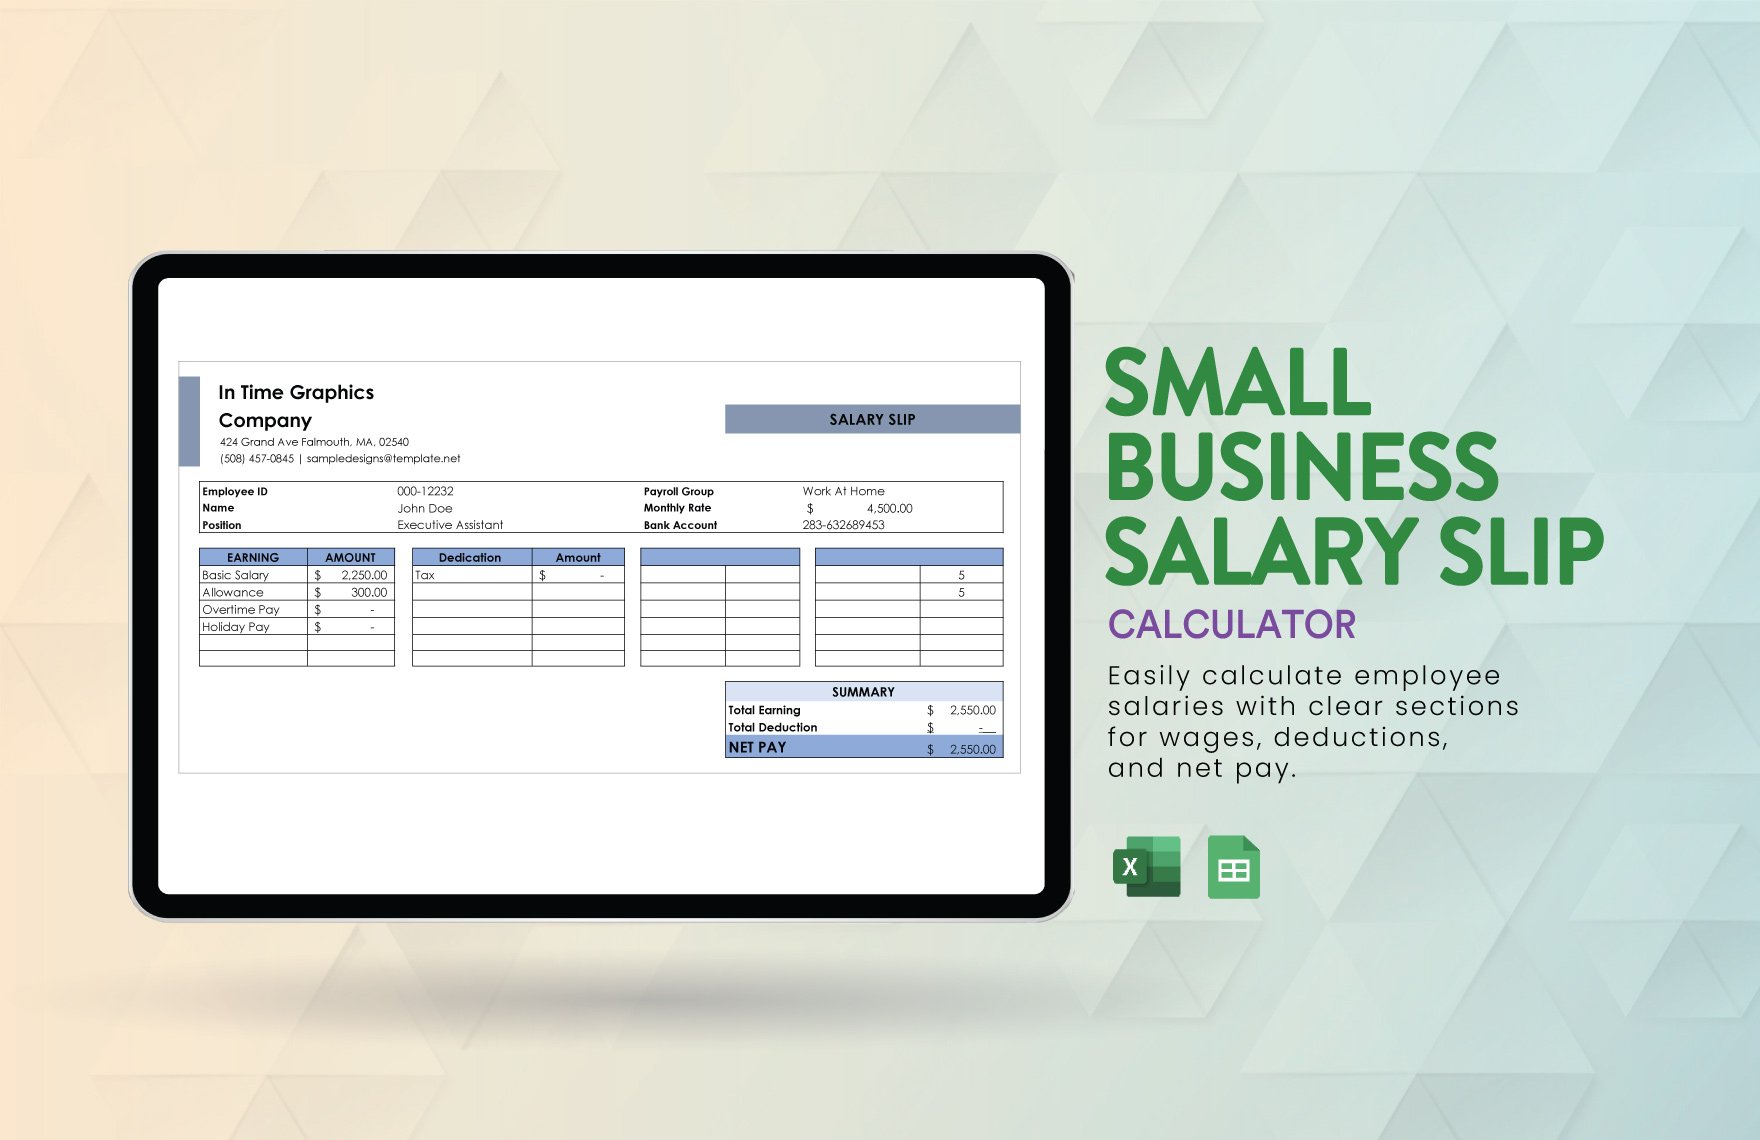 Free Small Business Salary Slip Calculator in Excel, Google Sheets